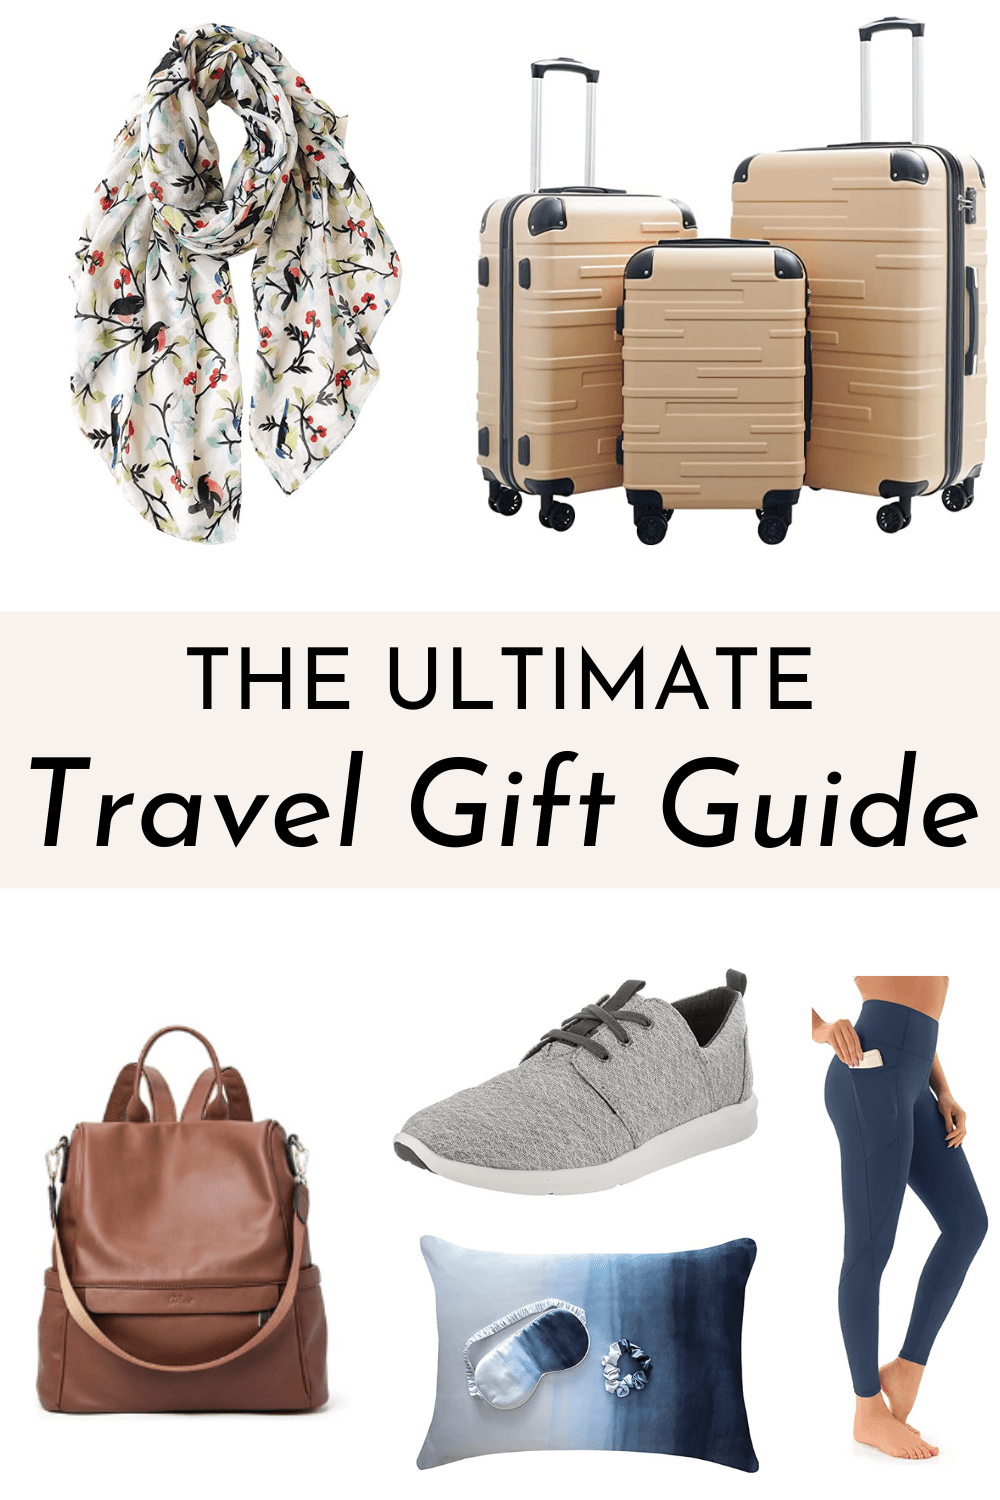 10 Must-Have Travel Items for Women Under $50 - Lucy On Locale